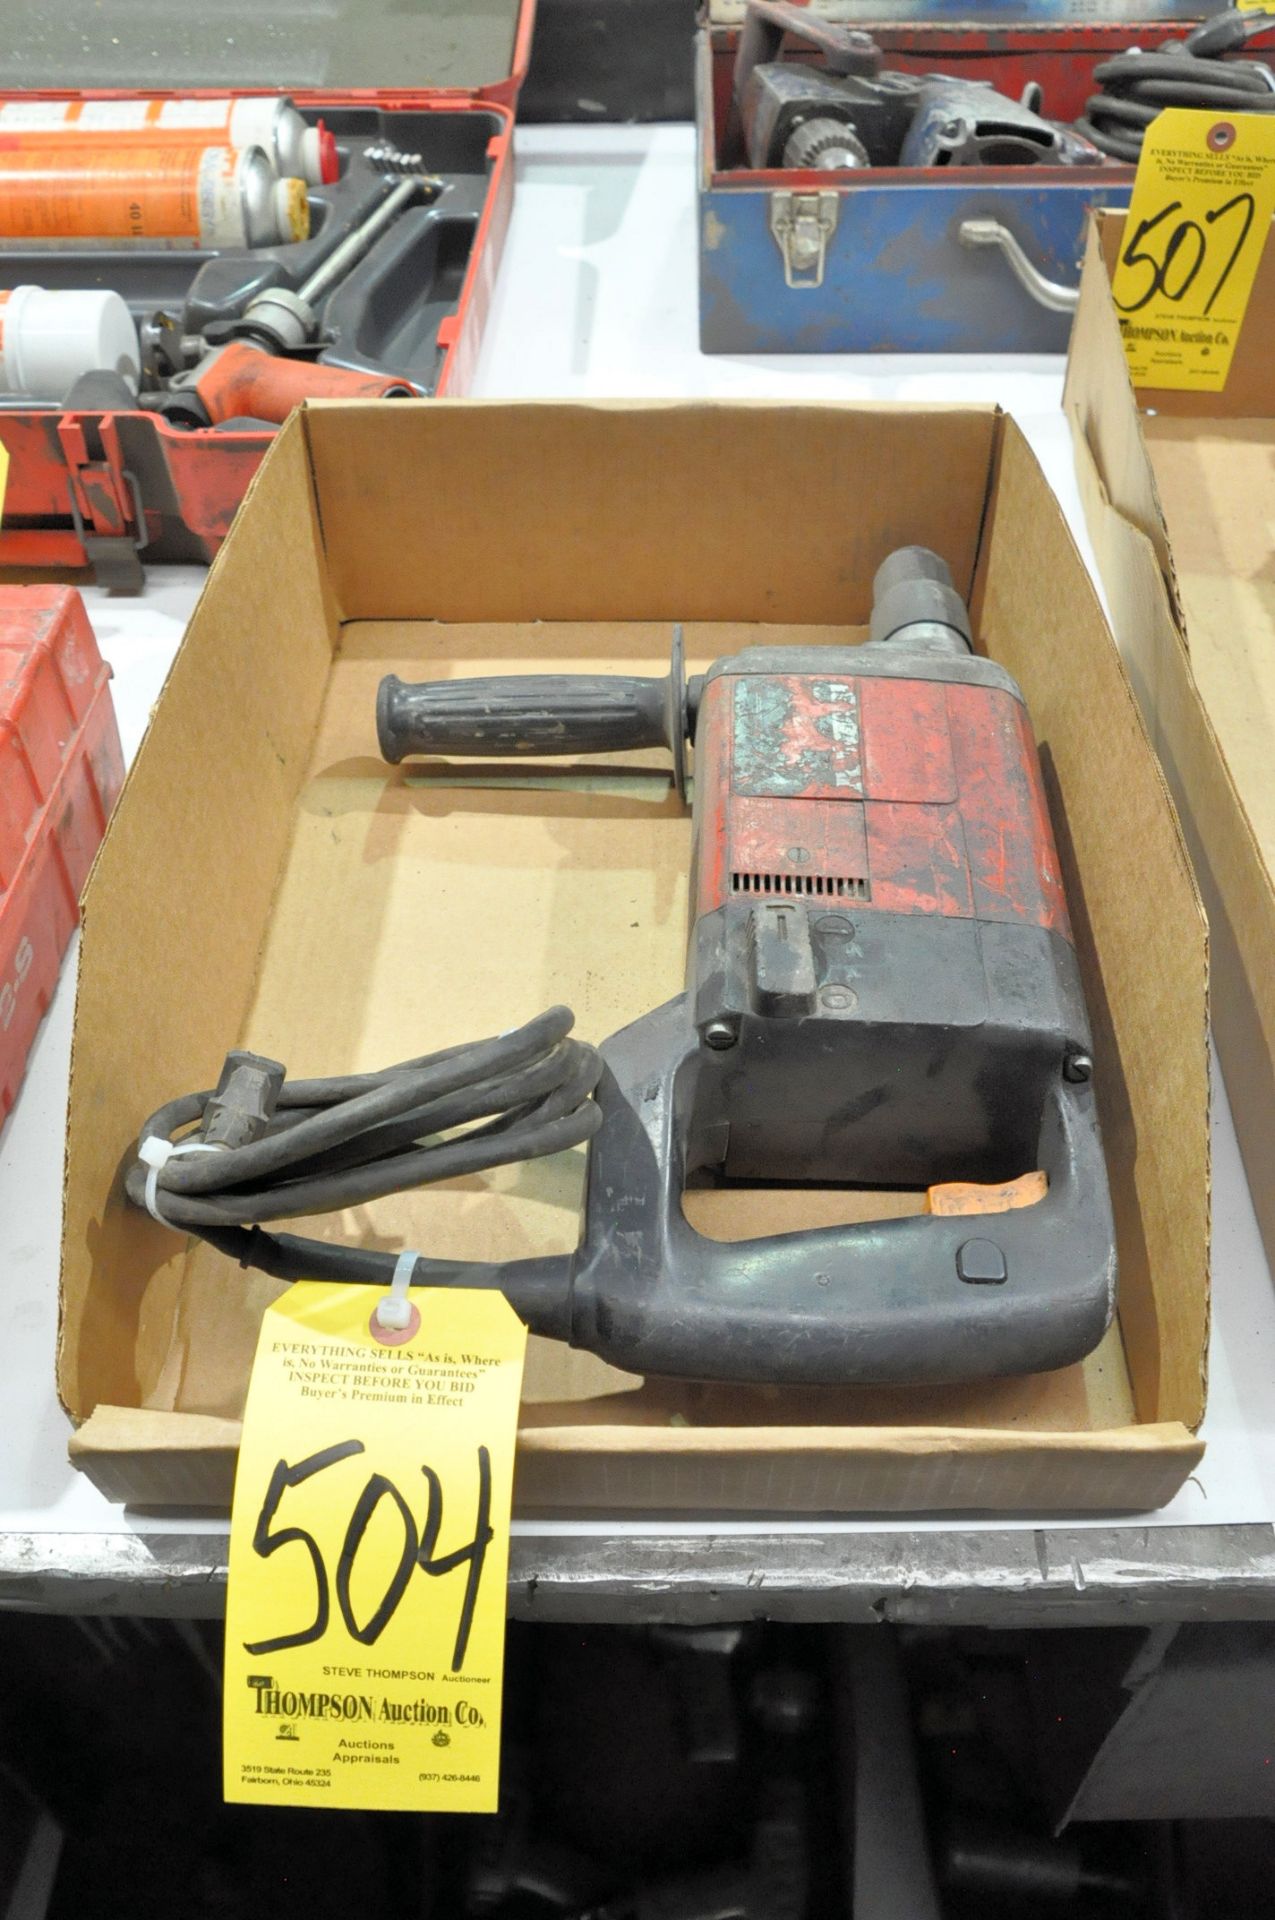 No Identifying Name Rotary Hammer Drill in (1) Box